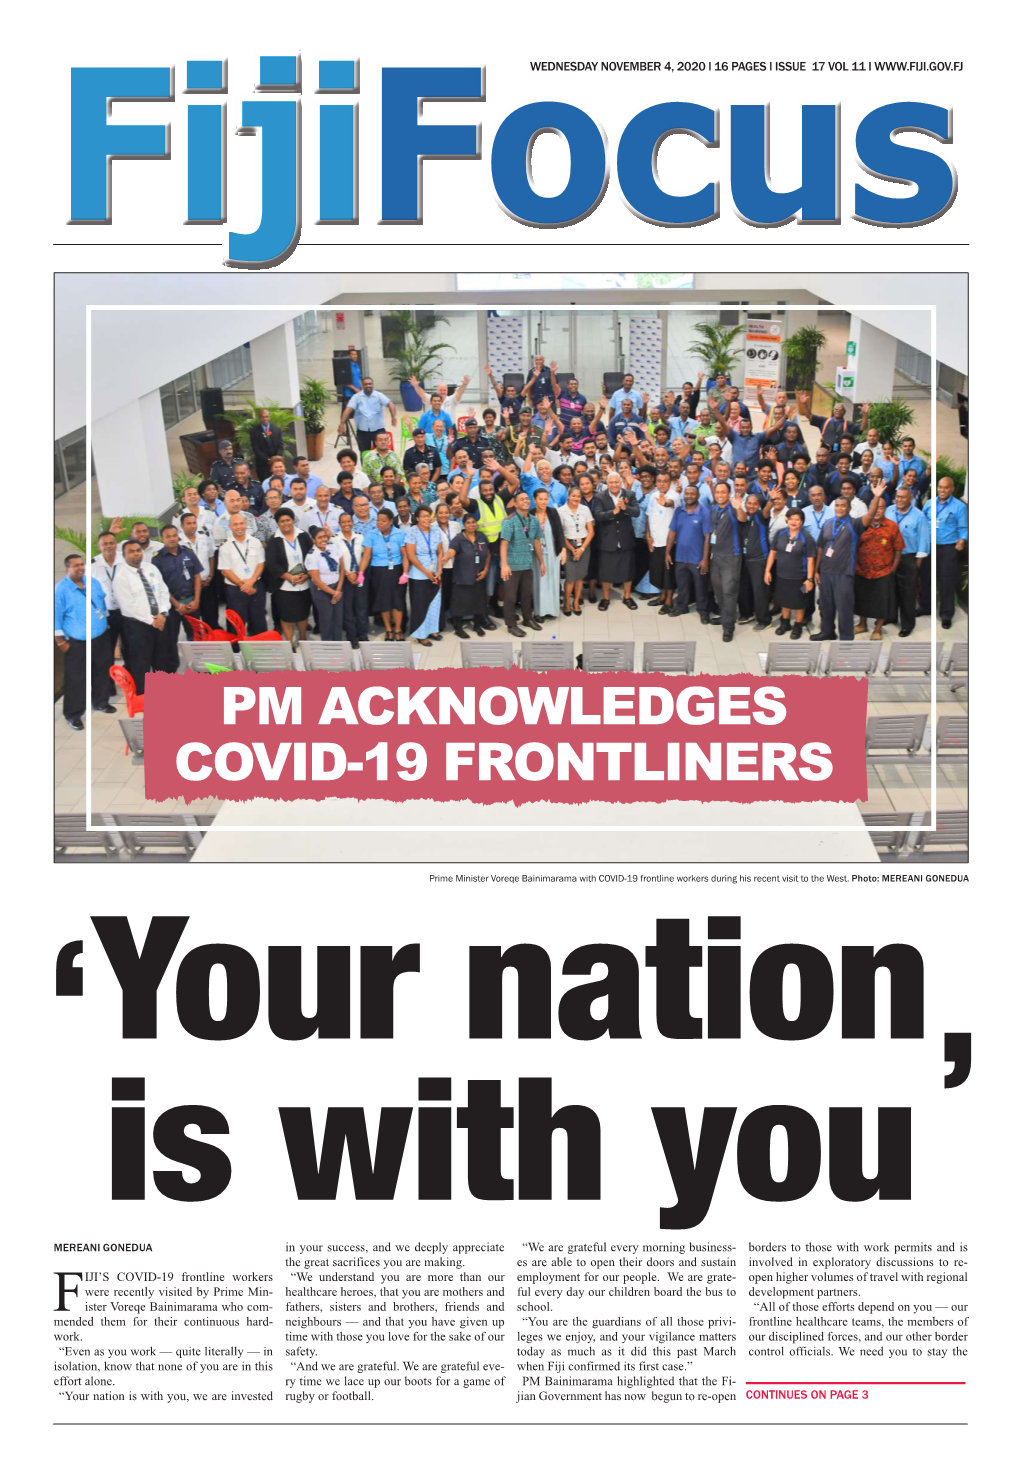 Pm Acknowledges Covid-19 Frontliners